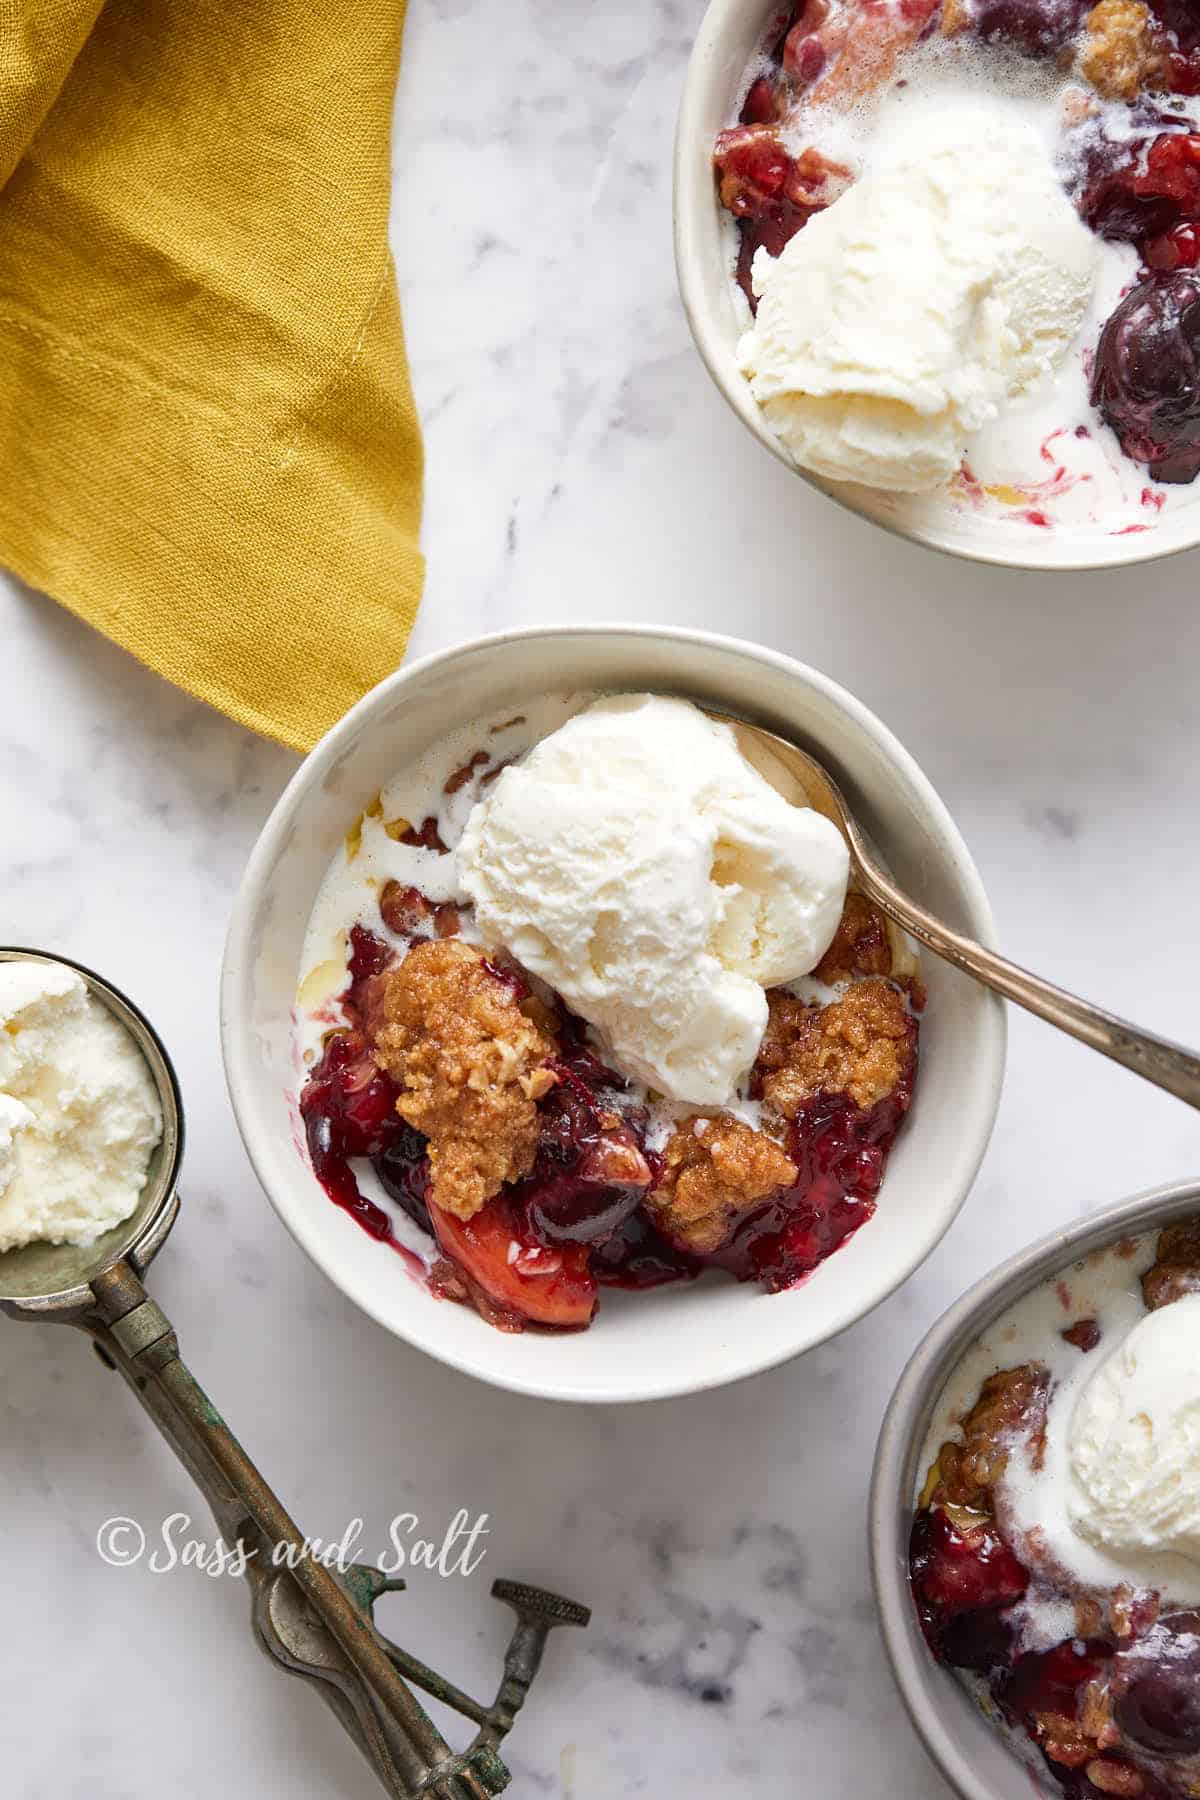 A bowl of peach and cherry crisp topped with a scoop of vanilla ice cream, beside a spoon and another dish of crisp, on a white marble surface with a yellow napkin.